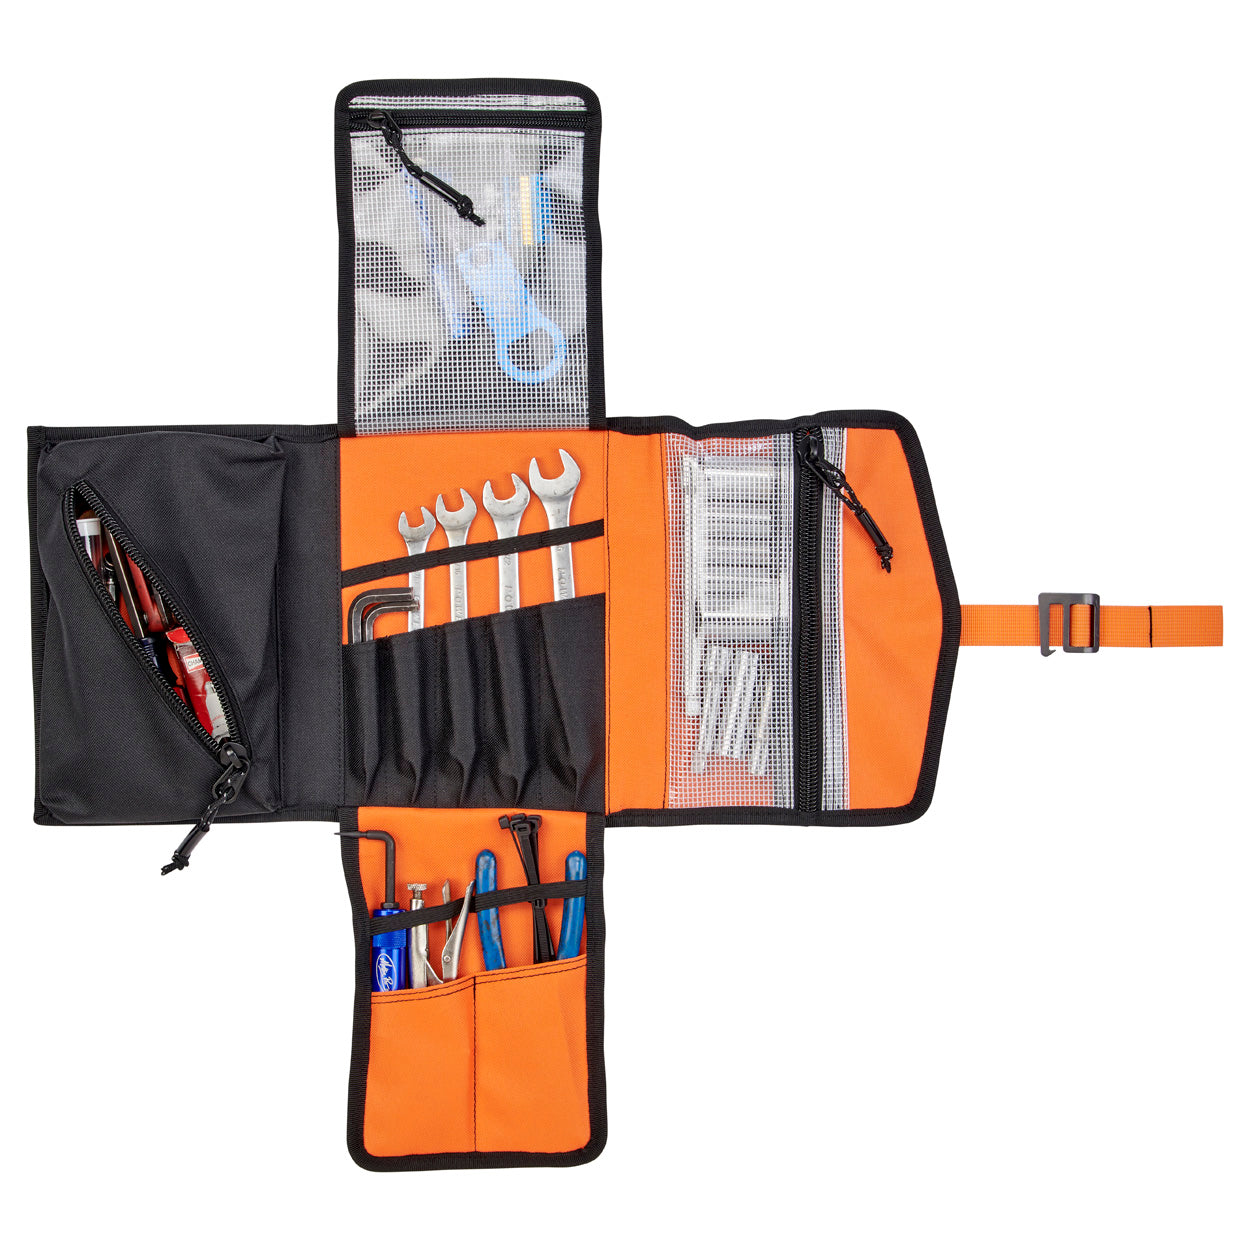 EXFIL-0 2.0 Tool Roll